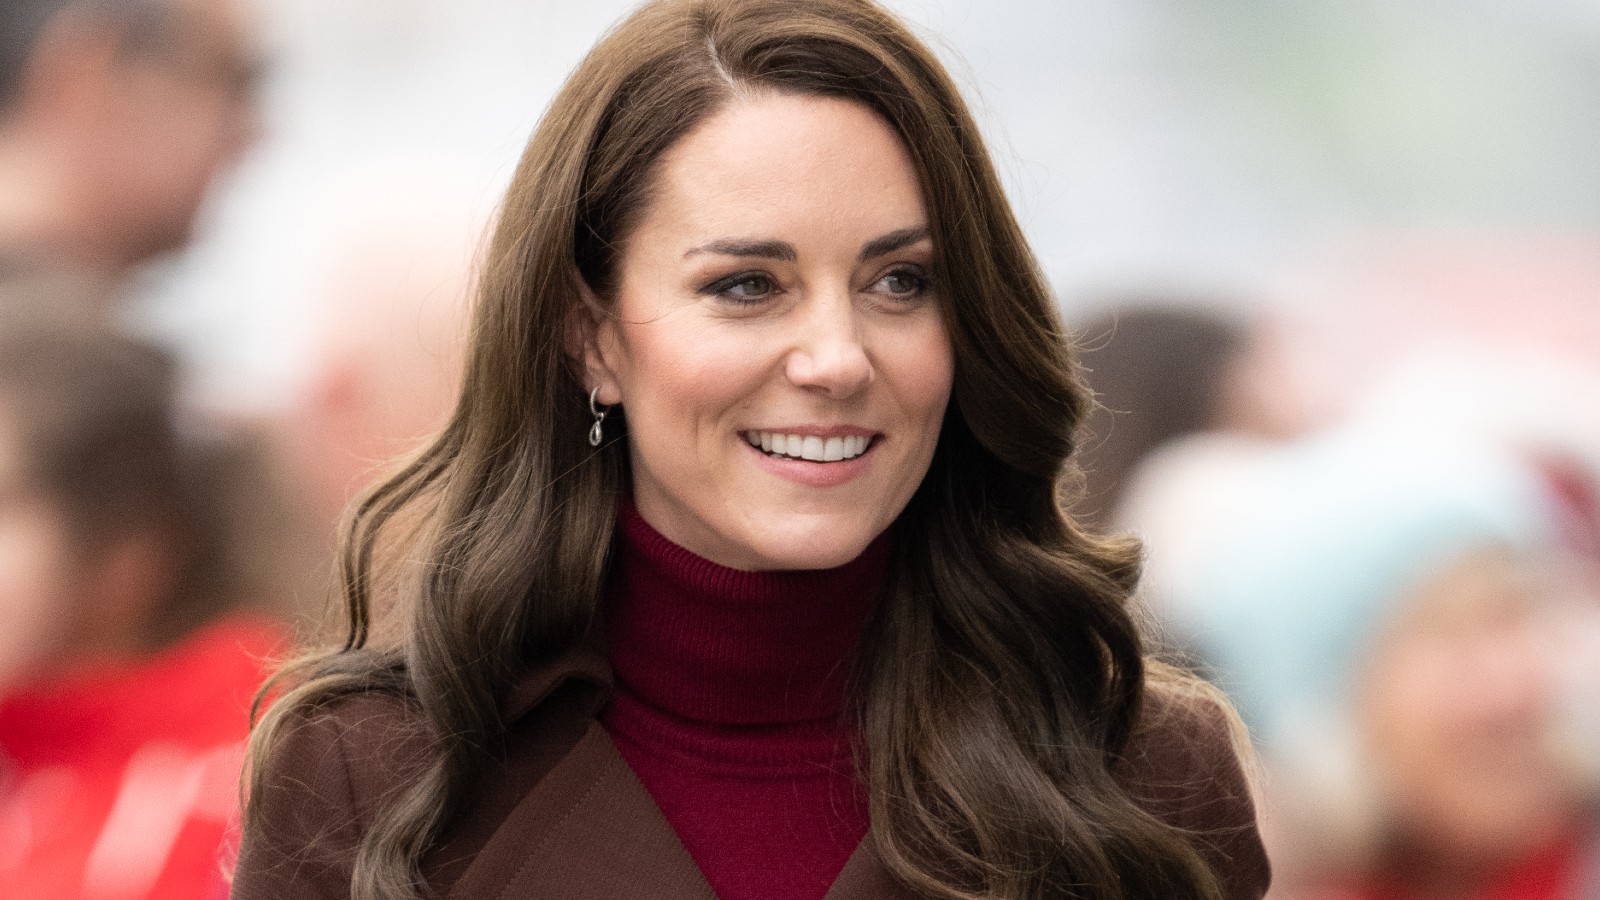 Longchamp Bags Like the Ones We've Seen Kate Middleton Carry Are